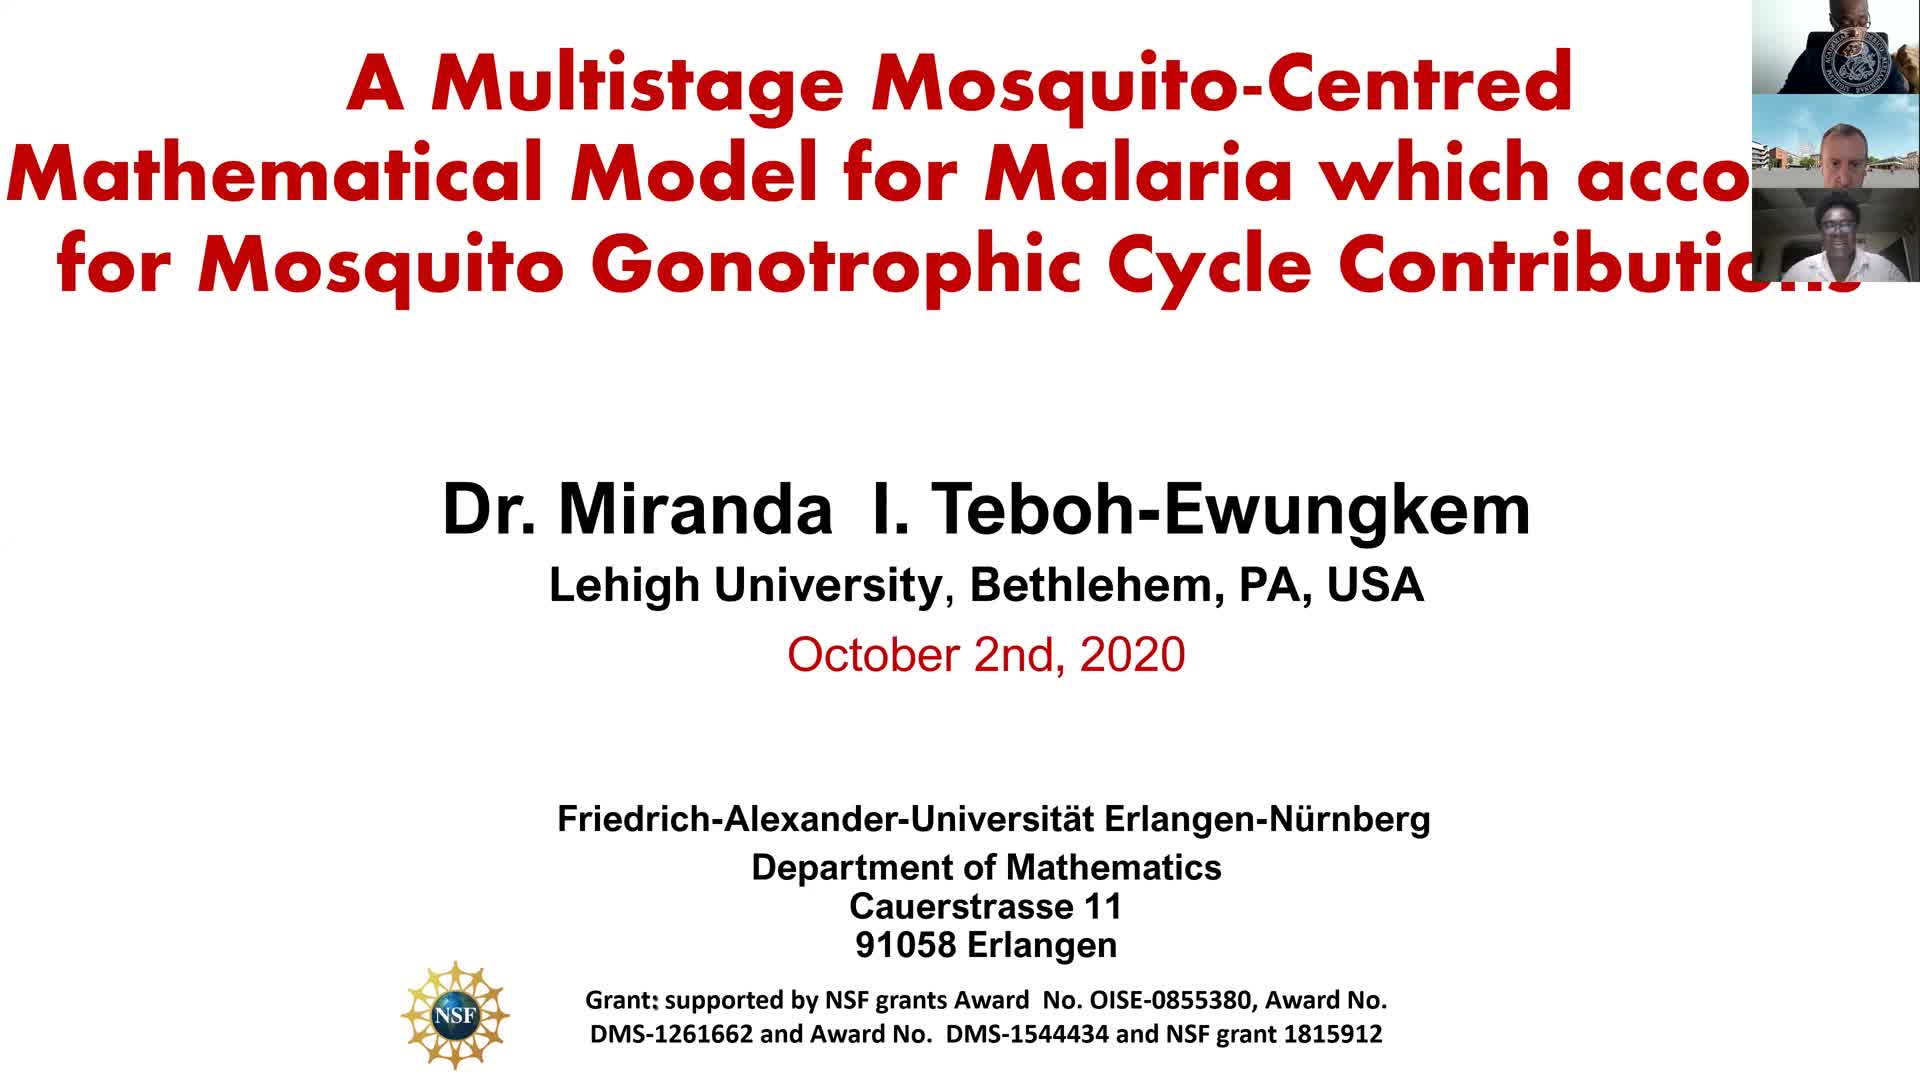 A Multistage Mosquito-Centred-Mathematical Model for Malaria which accounts for Mosquito Gonotrophic Cycle Contributions (Miranda Teboh-Ewungkem, Lehigh University) preview image